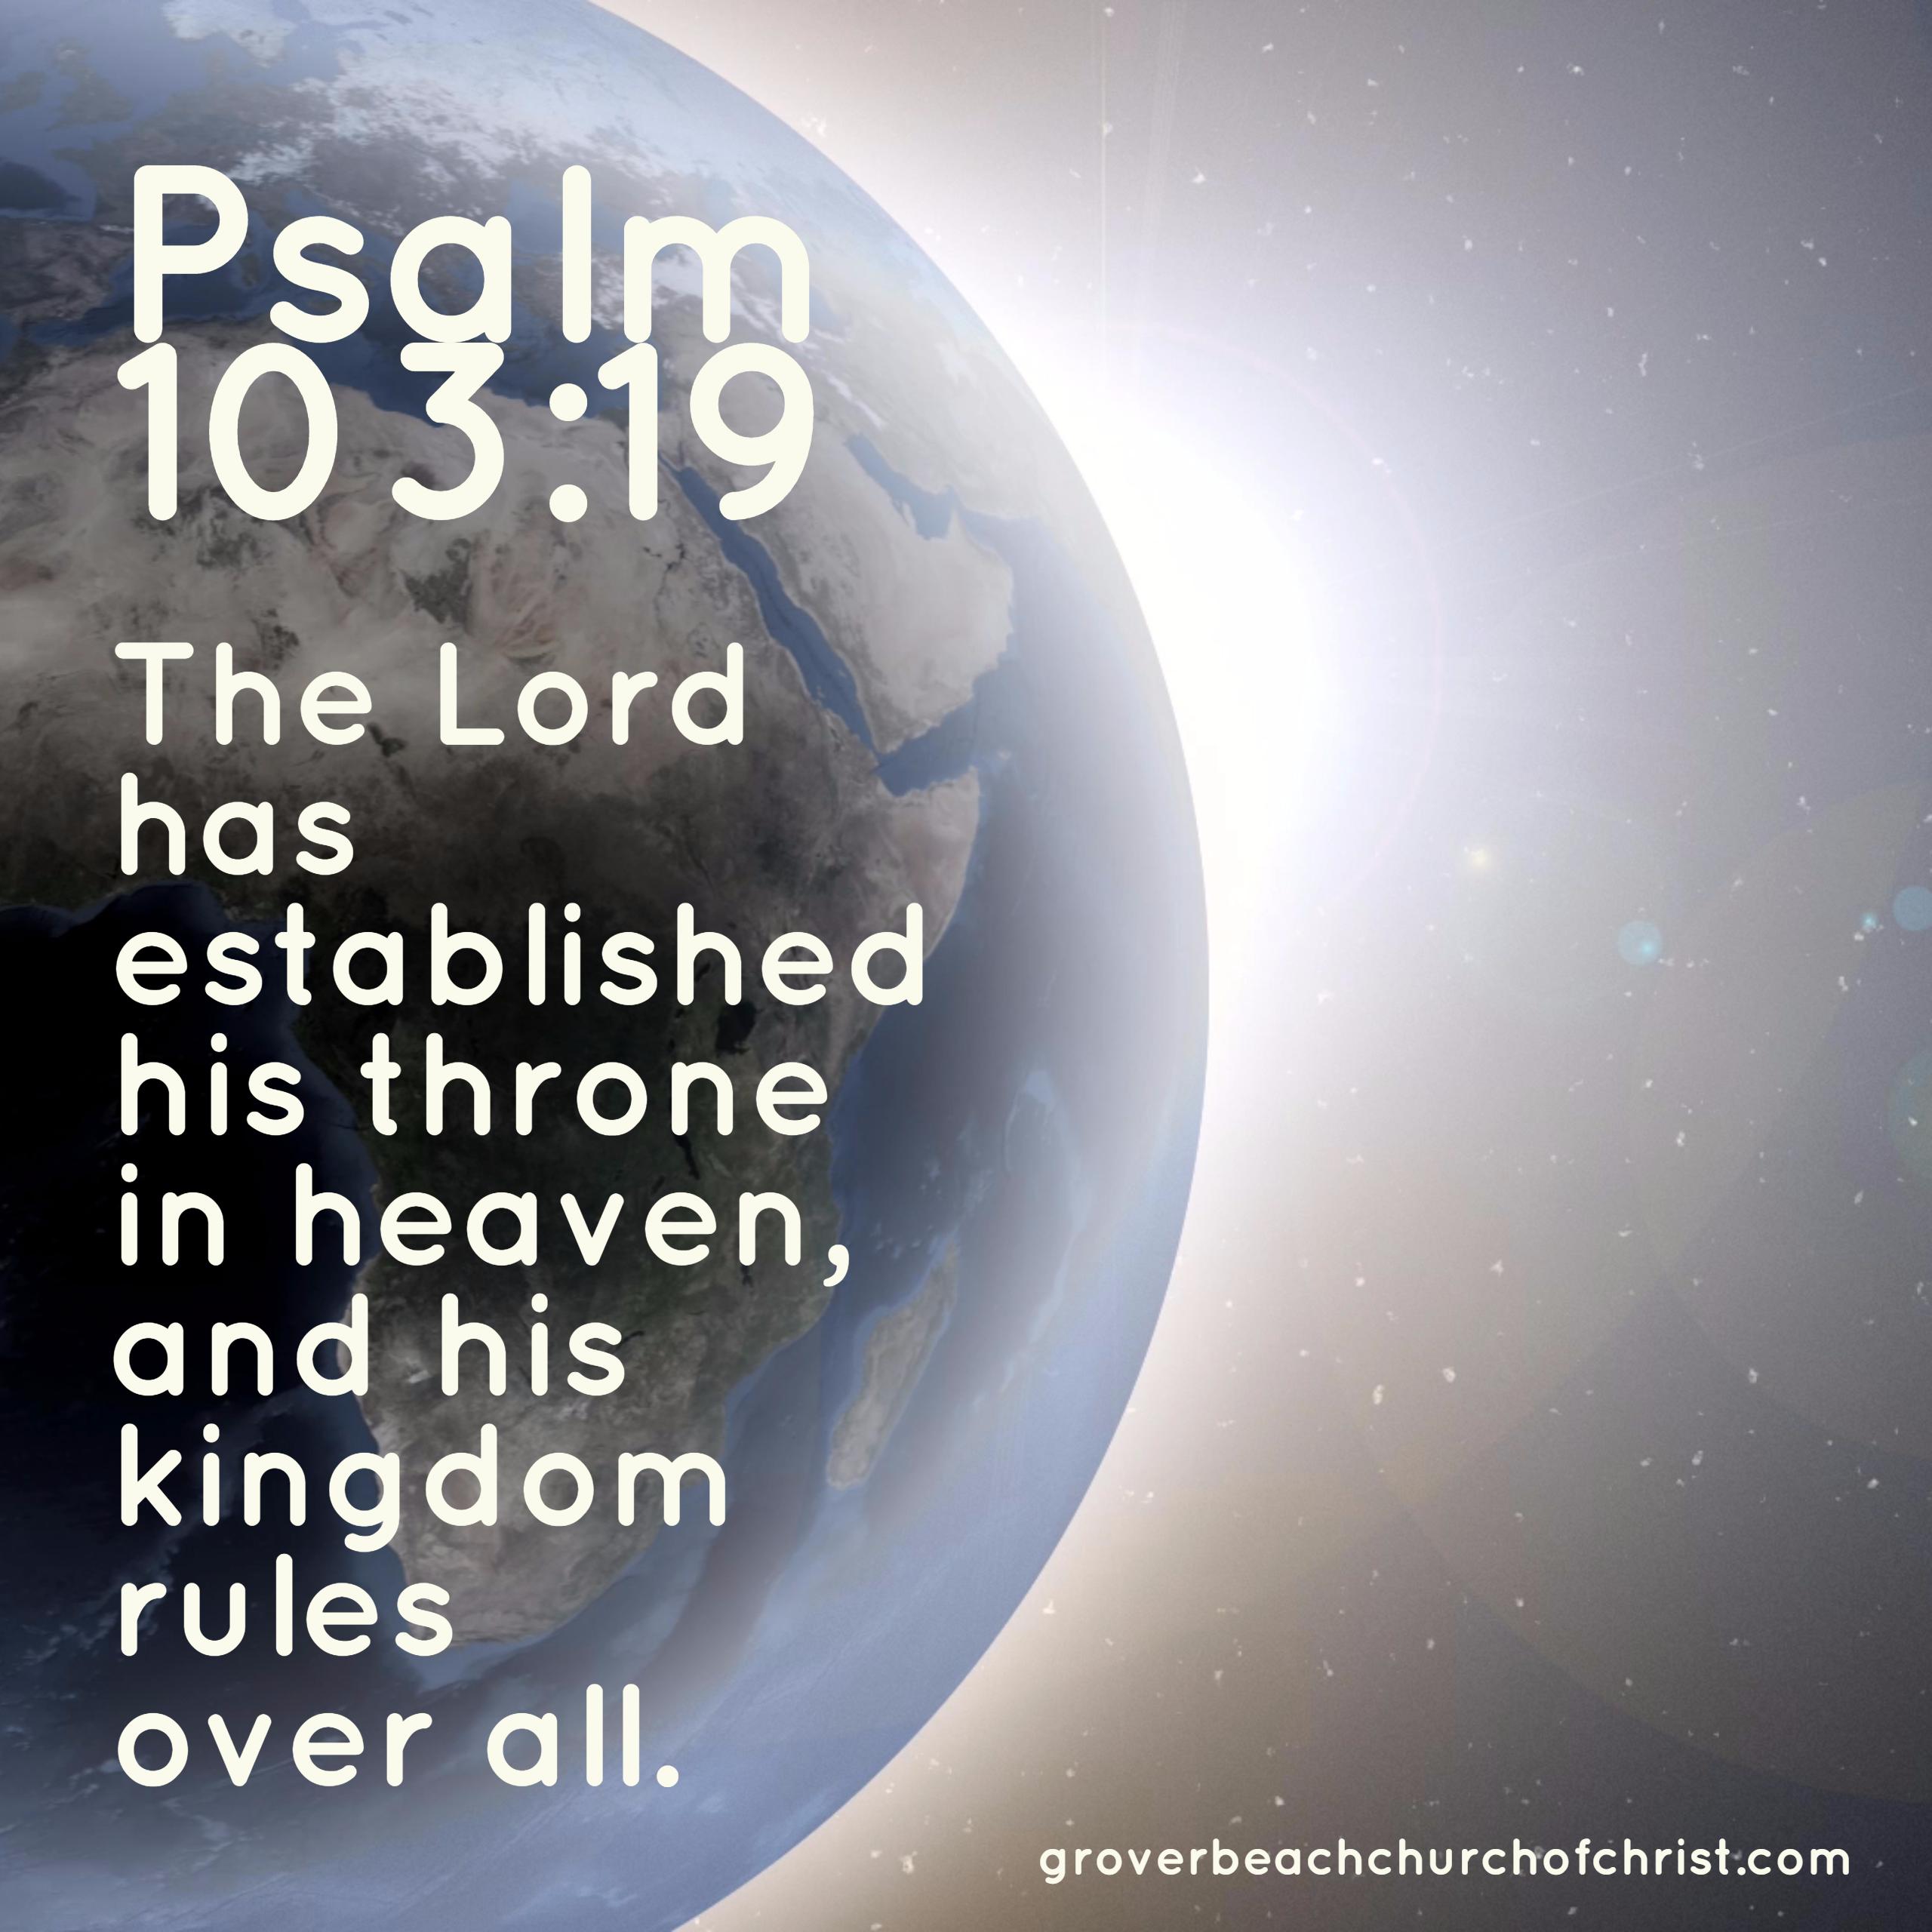 Psalm 103:19 The Lord has established